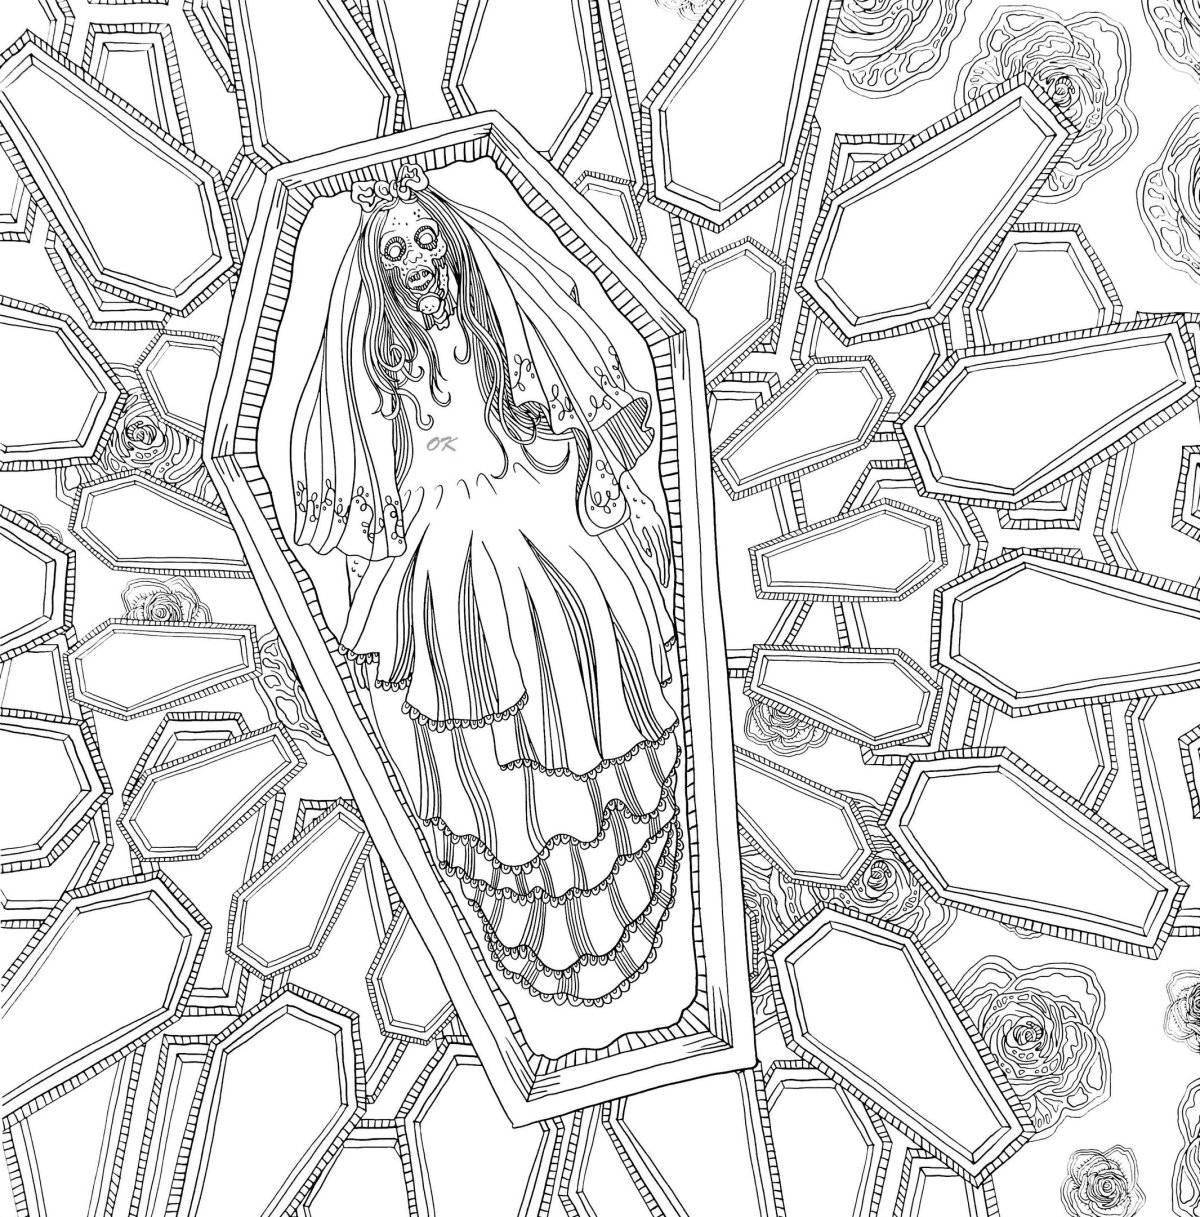 Nasty and scary horror coloring book